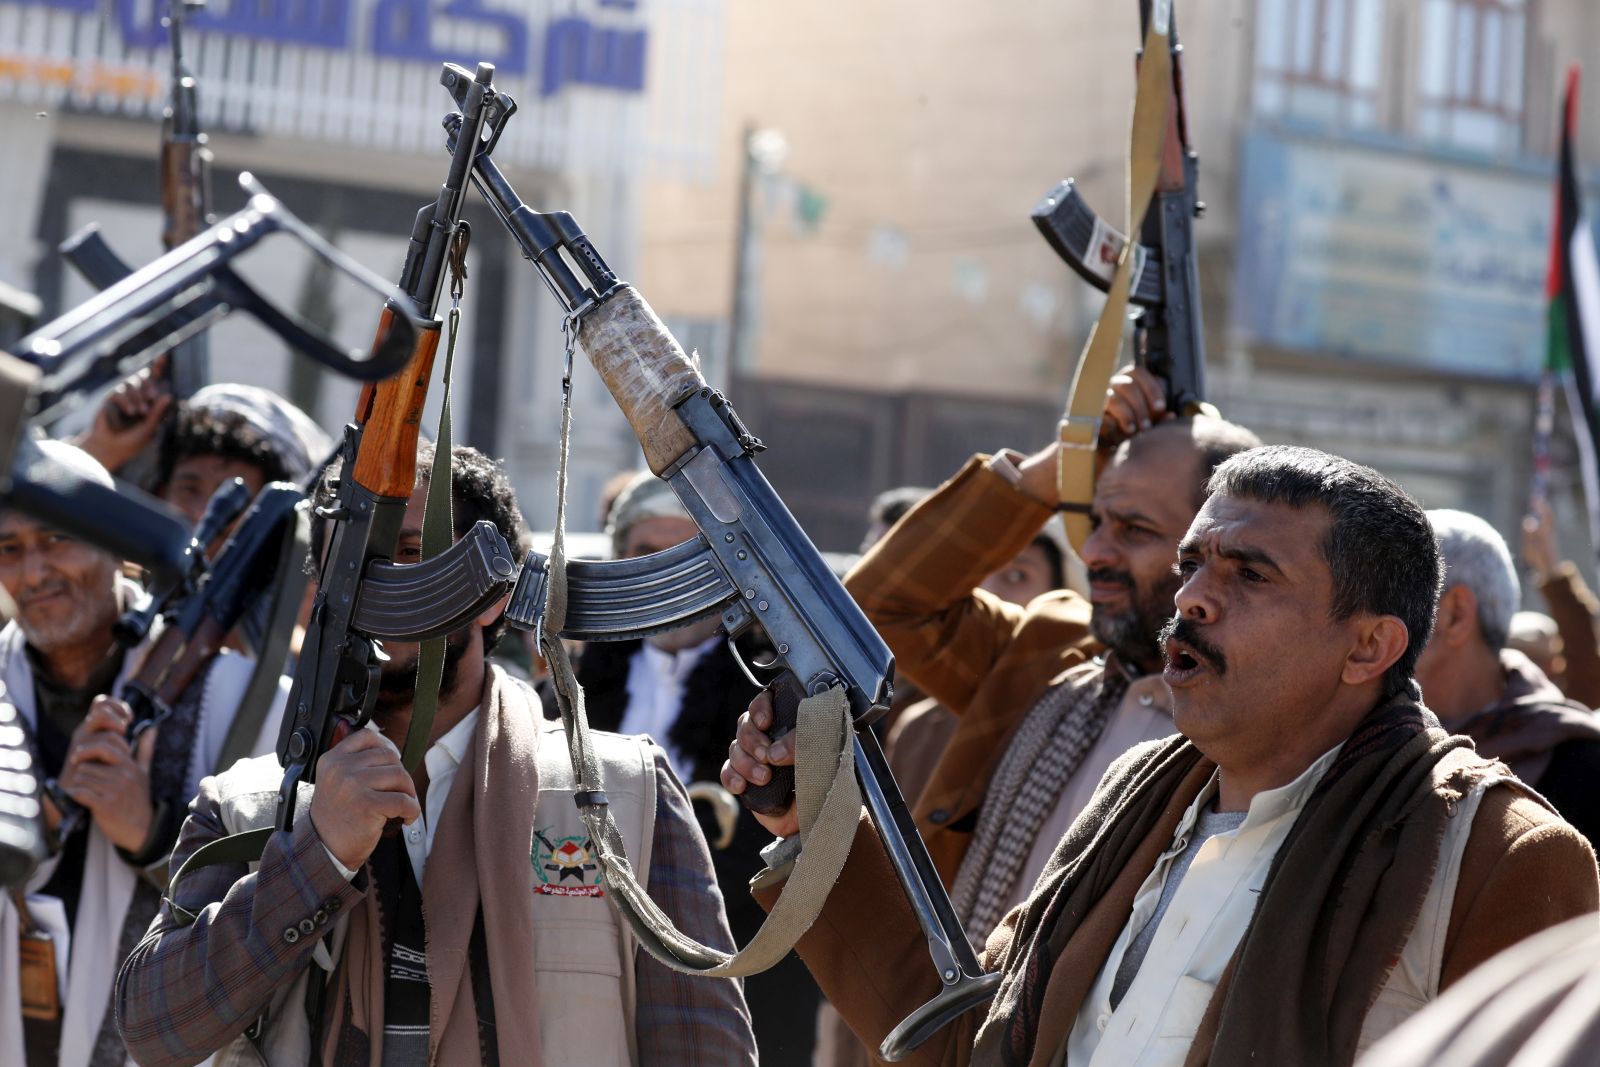 epa11070044 Newly-recruited members of the Houthis' popular army hold up their weapons during a gathering at the end of a military training, in Sana'a, Yemen, 11 January 2024. Yemen's Houthis top leader Abdul-Malik Al-Houthi has warned in a televised address on 11 January that any US military operation against his movement will never go unanswered, two days after the Houthis launched a large-scale missile and drone attack against international shipping lanes in the Red Sea, in response to a previous US Navy attack on Houthi boats in the Red Sea that killed 10 Houthi fighters on 31 December 2023. The US Department of Defense had announced in December 2023 a multinational operation to safeguard trade and to protect ships in the Red Sea amid the recent escalation in Houthi attacks. The Houthis have vowed to attack Israeli-bound ships and prevent them from navigating in the Red Sea and the Bab al-Mandab Strait in retaliation for Israel's airstrikes on the Gaza Strip.  EPA/YAHYA ARHAB